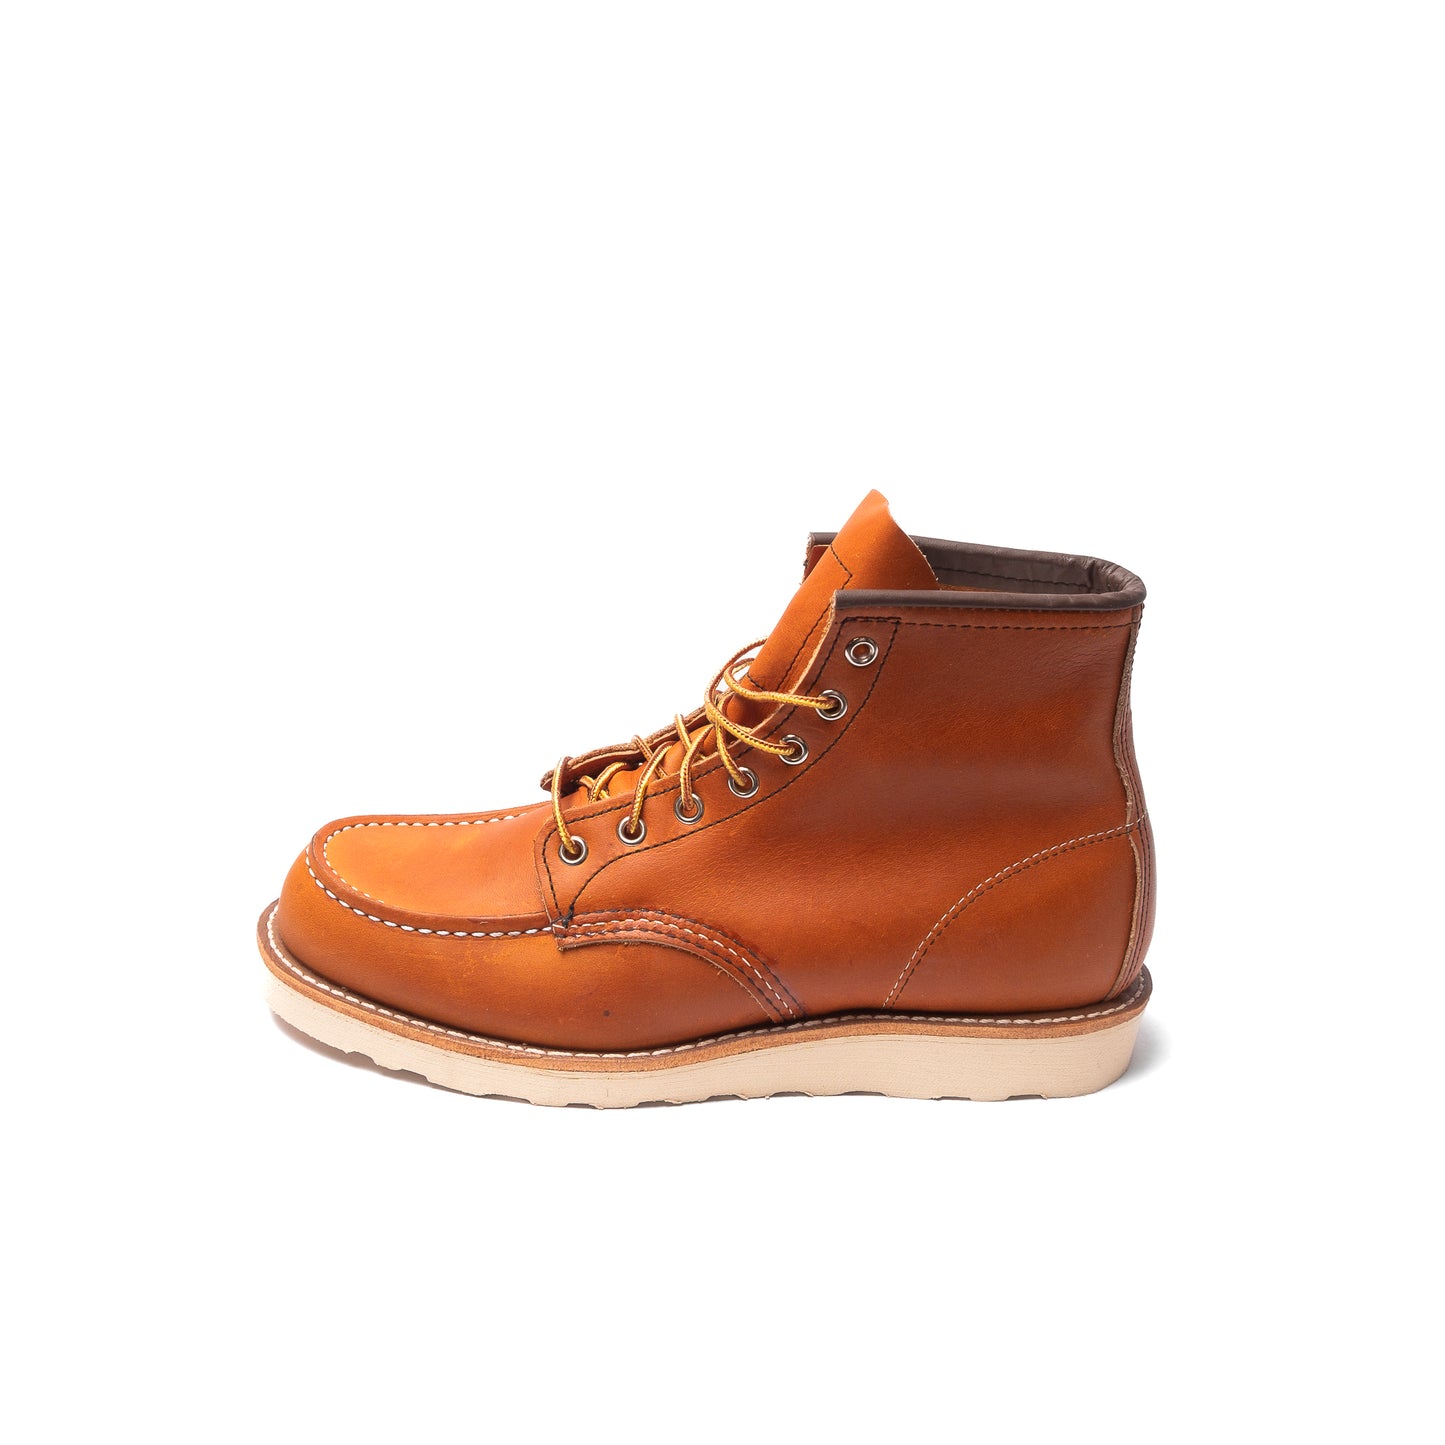 RED WING SHOES - Moc Toe 875 Oro Legacy